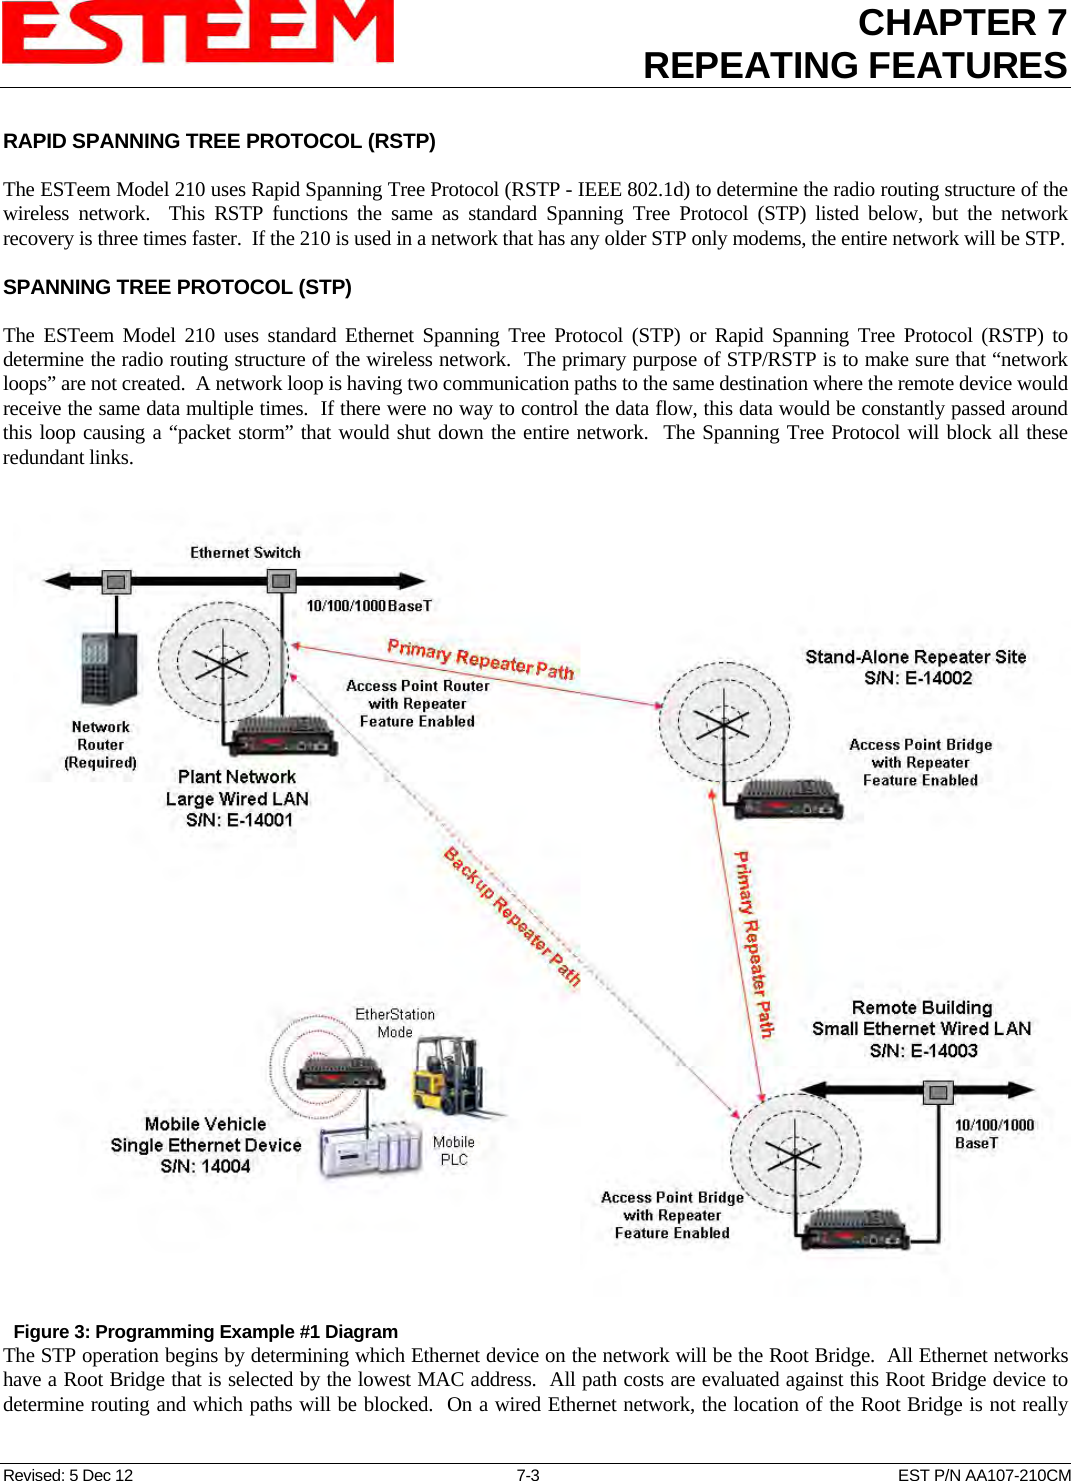 CHAPTER 7REPEATING FEATURES   Revised: 5 Dec 12  7-3  EST P/N AA107-210CM RAPID SPANNING TREE PROTOCOL (RSTP)  The ESTeem Model 210 uses Rapid Spanning Tree Protocol (RSTP - IEEE 802.1d) to determine the radio routing structure of the wireless network.  This RSTP functions the same as standard Spanning Tree Protocol (STP) listed below, but the network recovery is three times faster.  If the 210 is used in a network that has any older STP only modems, the entire network will be STP.  SPANNING TREE PROTOCOL (STP)  The ESTeem Model 210 uses standard Ethernet Spanning Tree Protocol (STP) or Rapid Spanning Tree Protocol (RSTP) to determine the radio routing structure of the wireless network.  The primary purpose of STP/RSTP is to make sure that “network loops” are not created.  A network loop is having two communication paths to the same destination where the remote device would receive the same data multiple times.  If there were no way to control the data flow, this data would be constantly passed around this loop causing a “packet storm” that would shut down the entire network.  The Spanning Tree Protocol will block all these redundant links.    The STP operation begins by determining which Ethernet device on the network will be the Root Bridge.  All Ethernet networks have a Root Bridge that is selected by the lowest MAC address.  All path costs are evaluated against this Root Bridge device to determine routing and which paths will be blocked.  On a wired Ethernet network, the location of the Root Bridge is not really   Figure 3: Programming Example #1 Diagram 